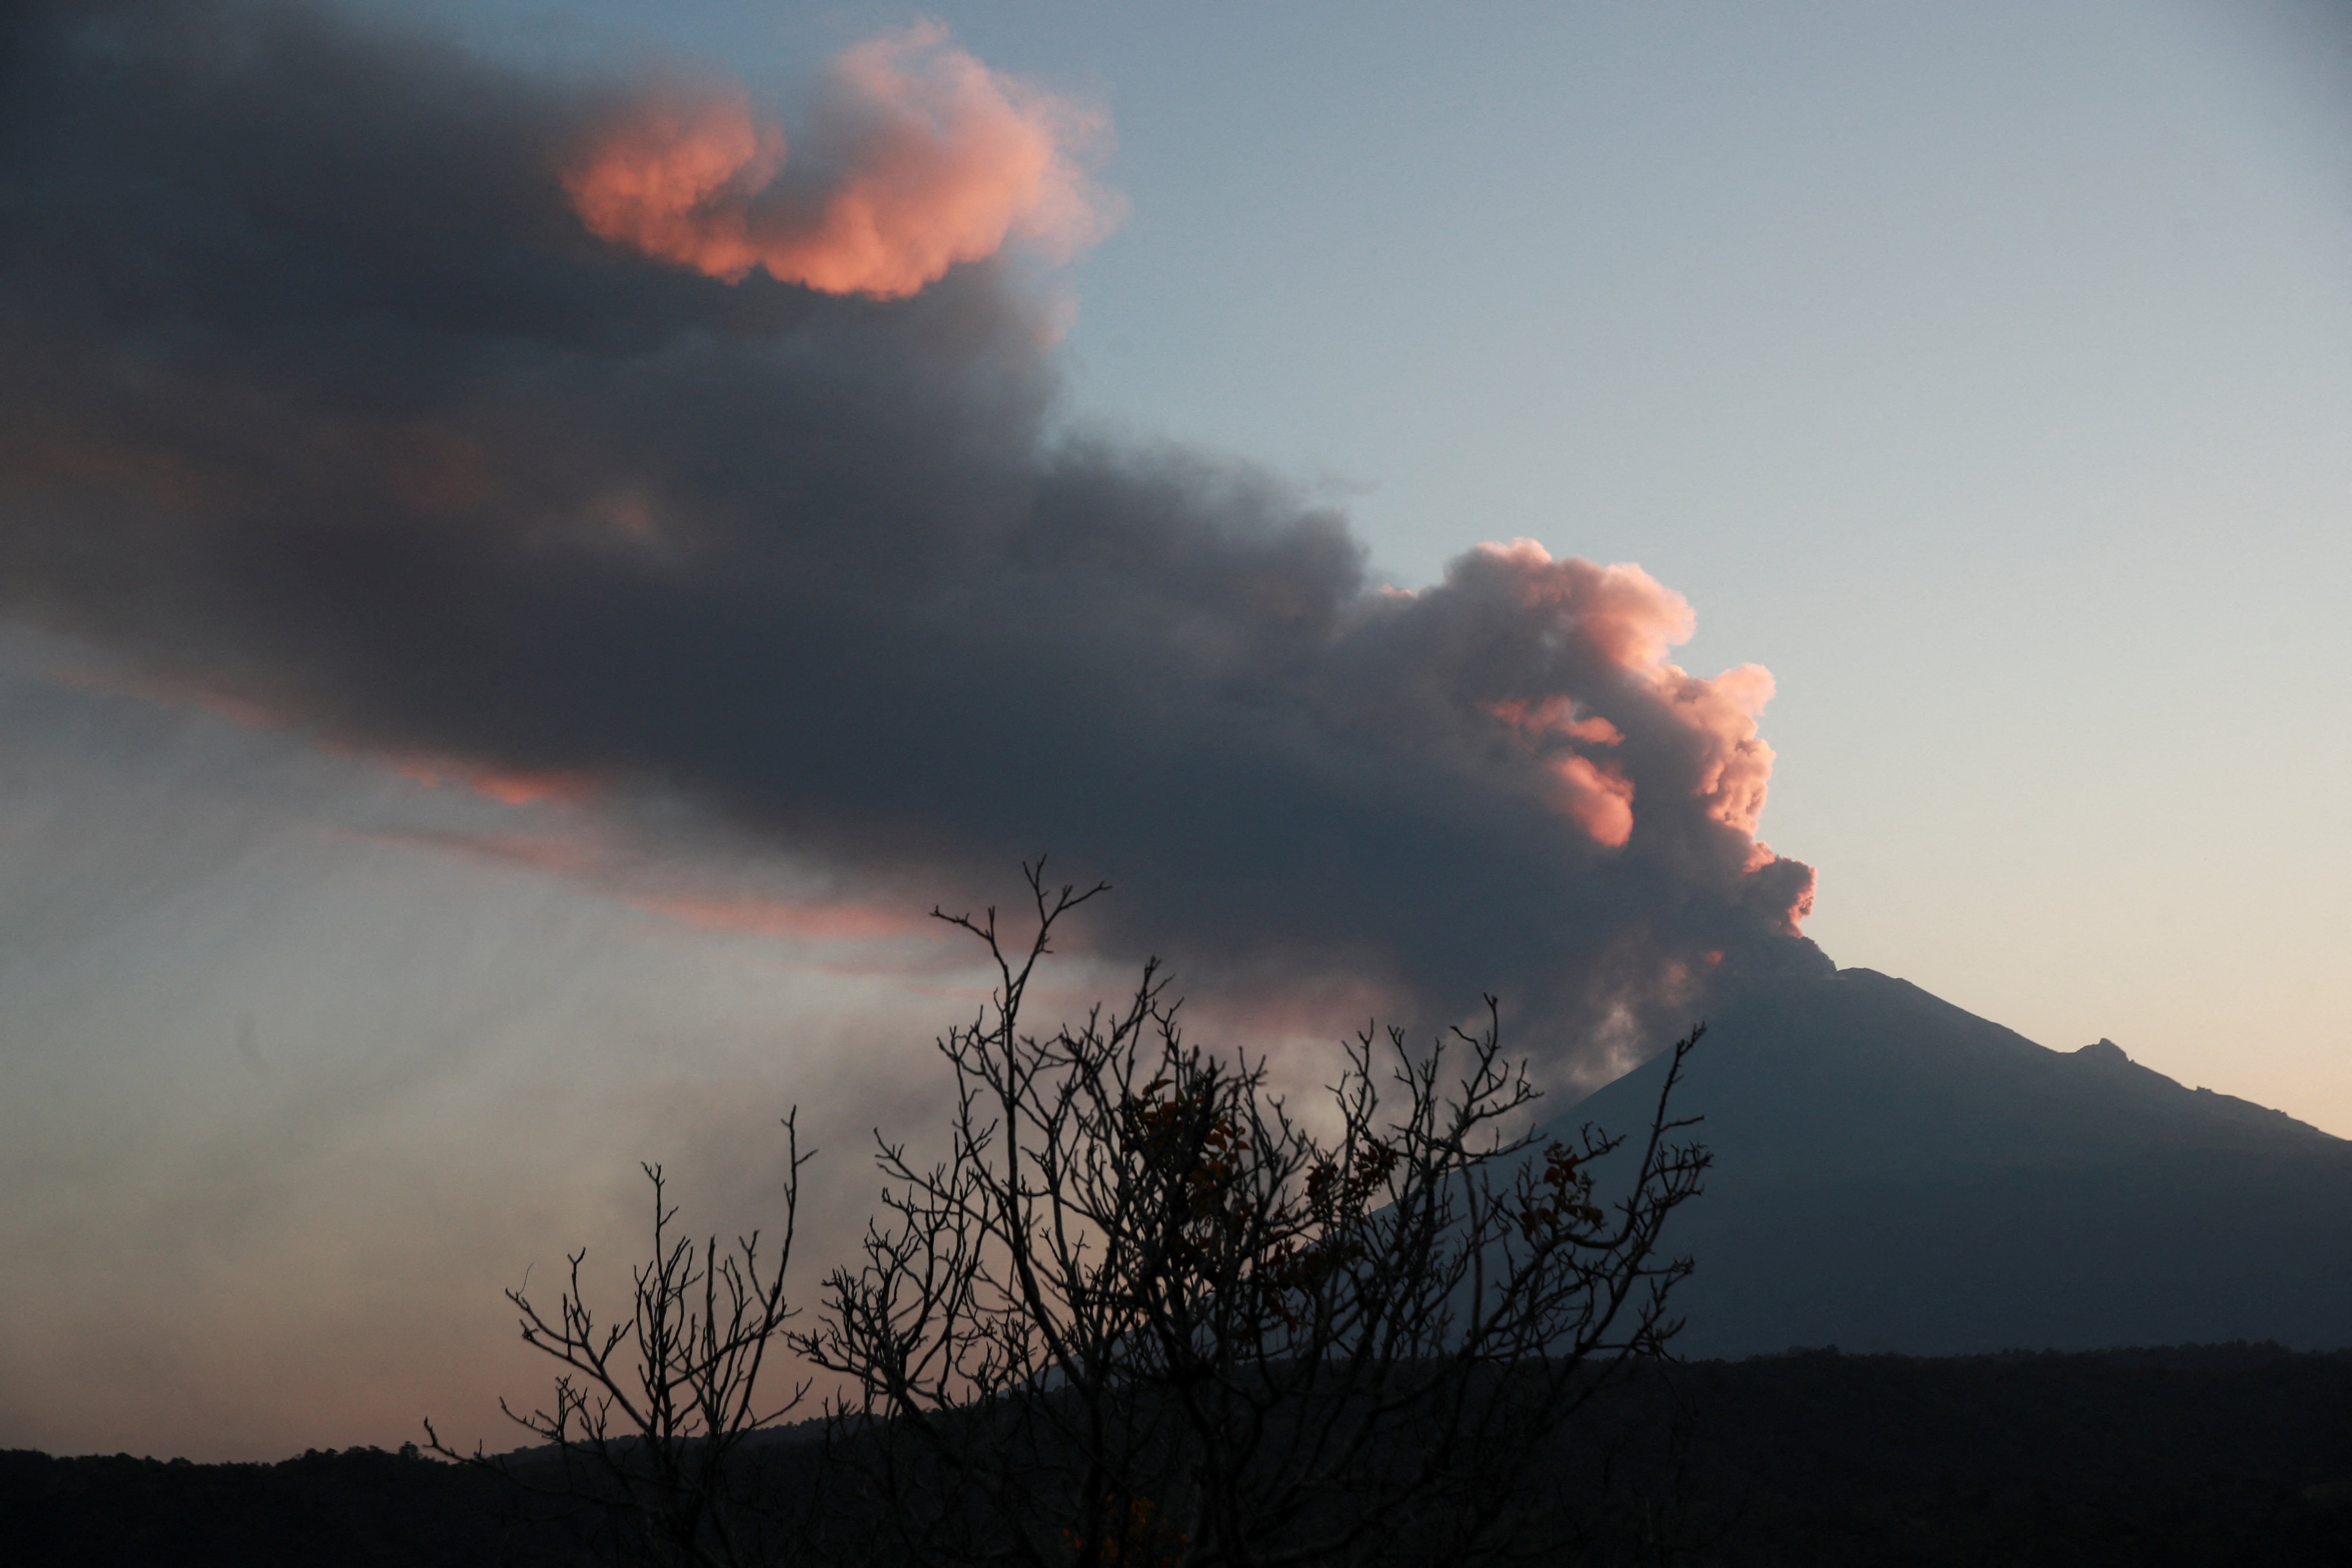 Popocatepetl volcano spews a column of ash and smoke as authorities declare a yellow alert